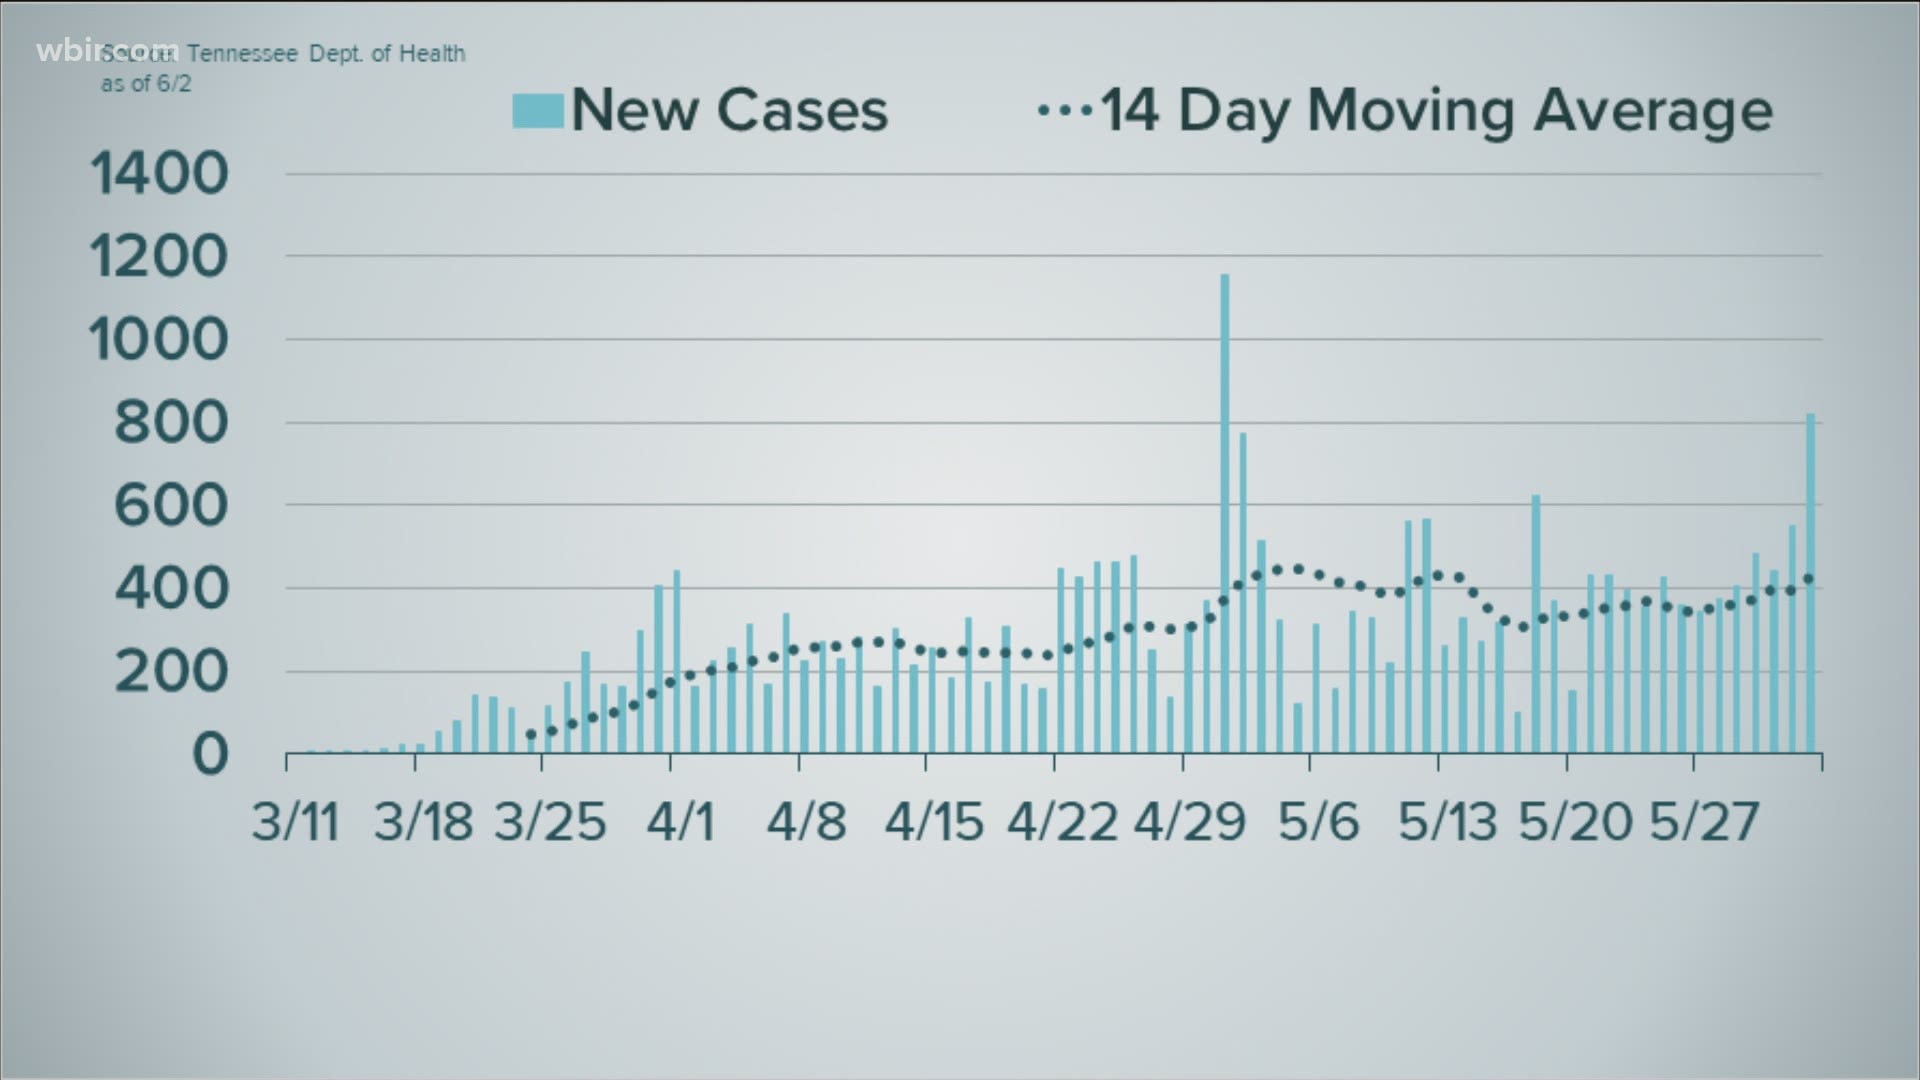 COVID-19 cases are on the rise here in Tennessee.